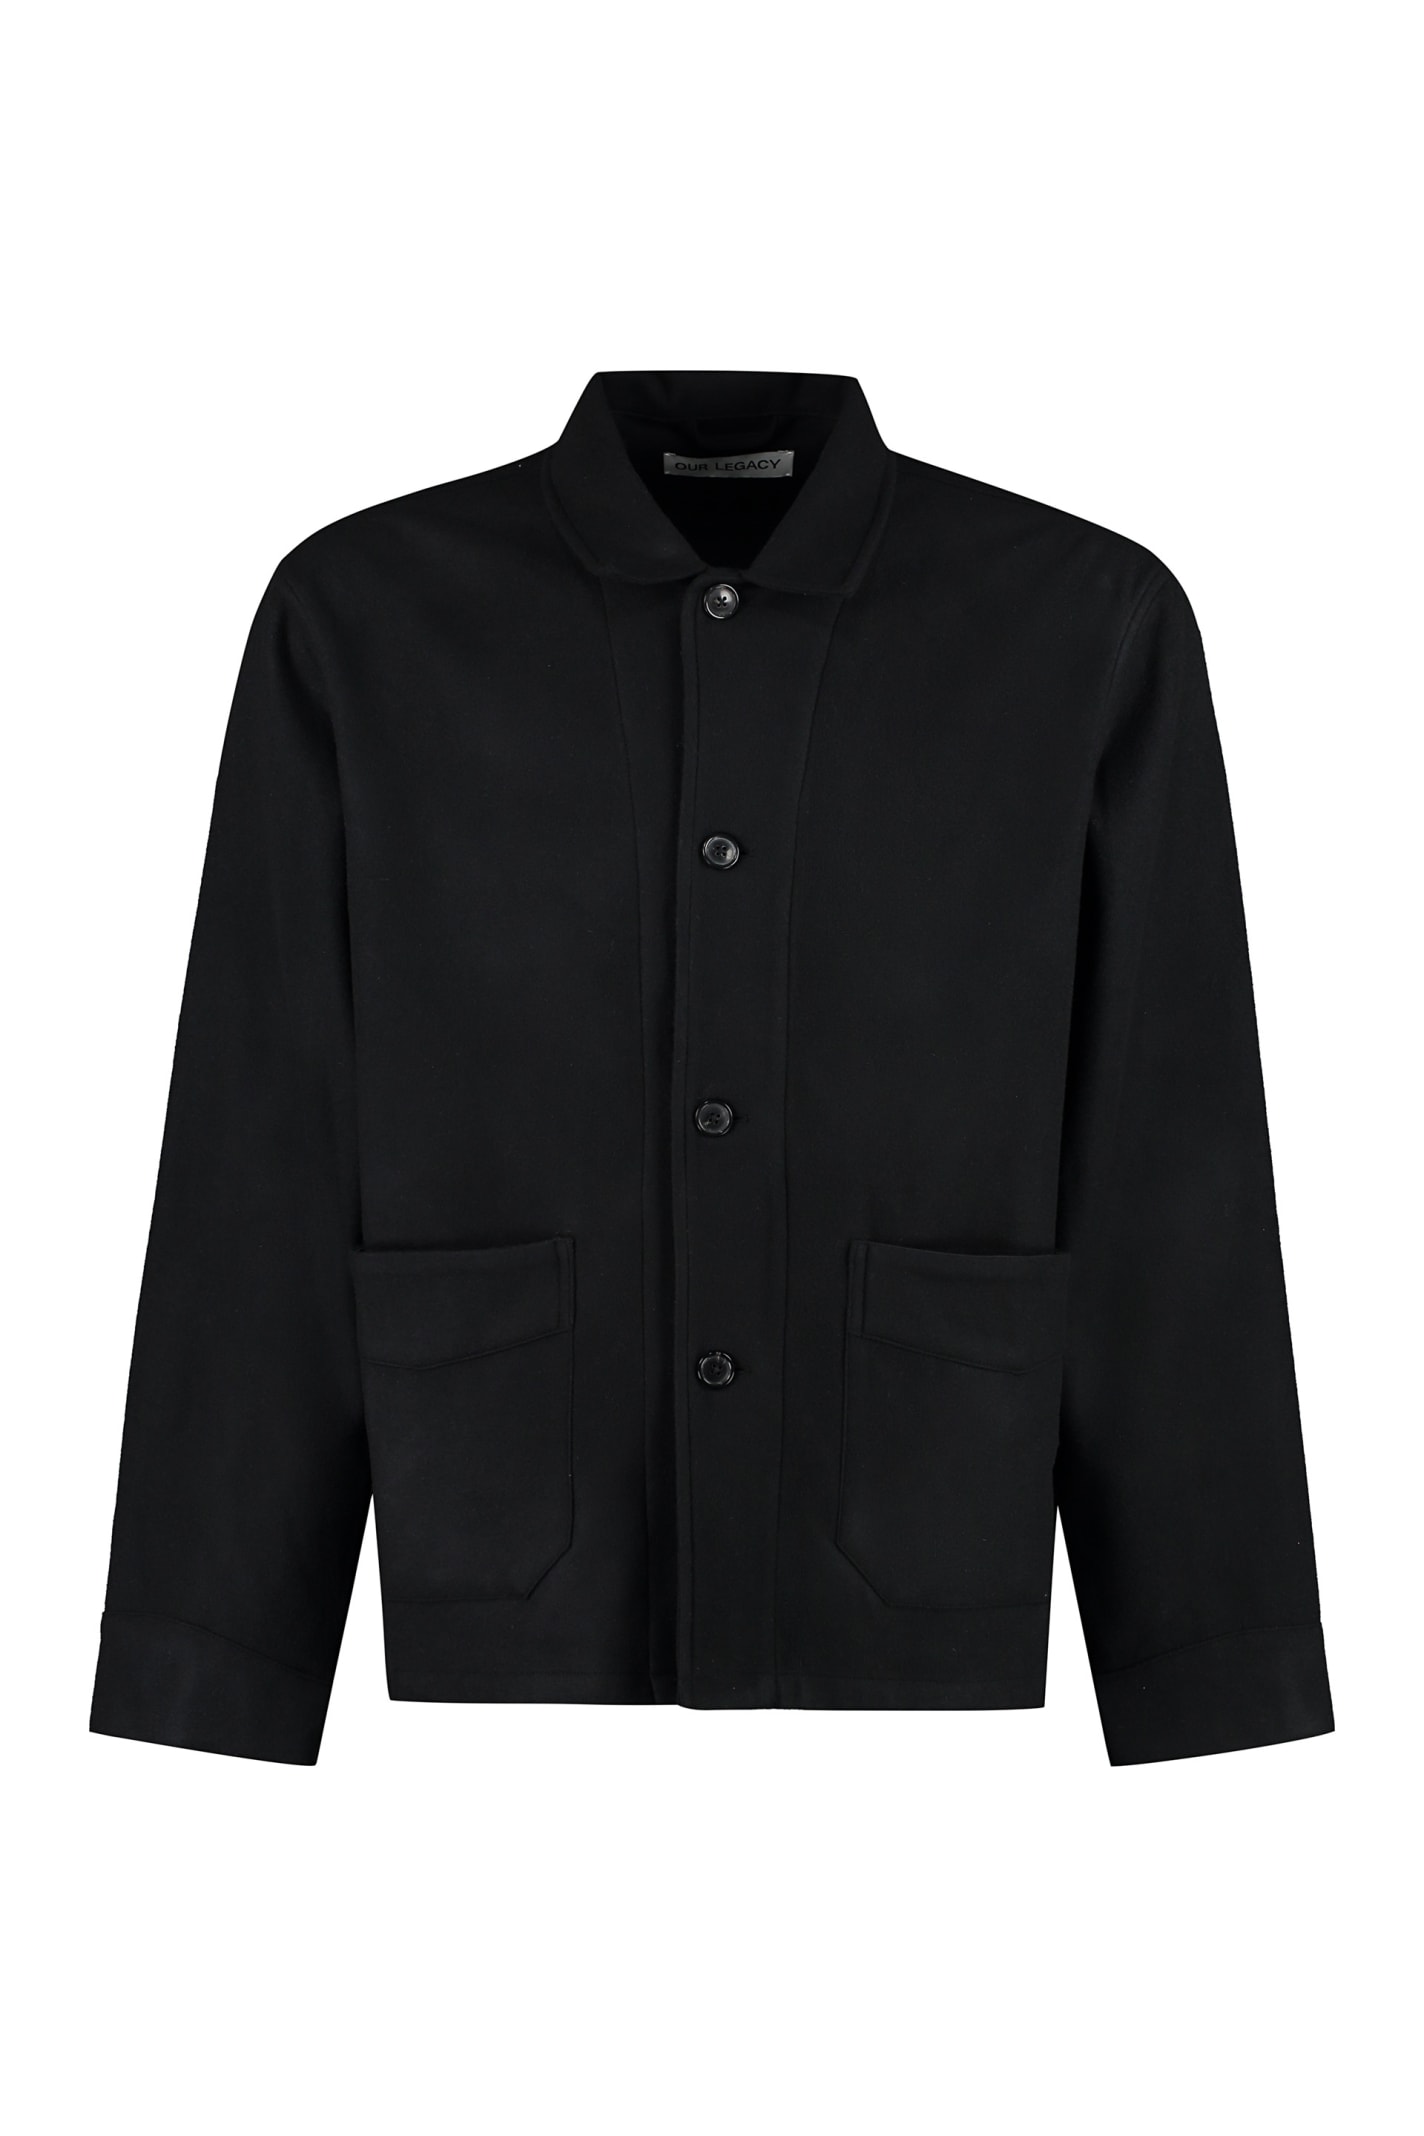 Our Legacy Wool Overshirt